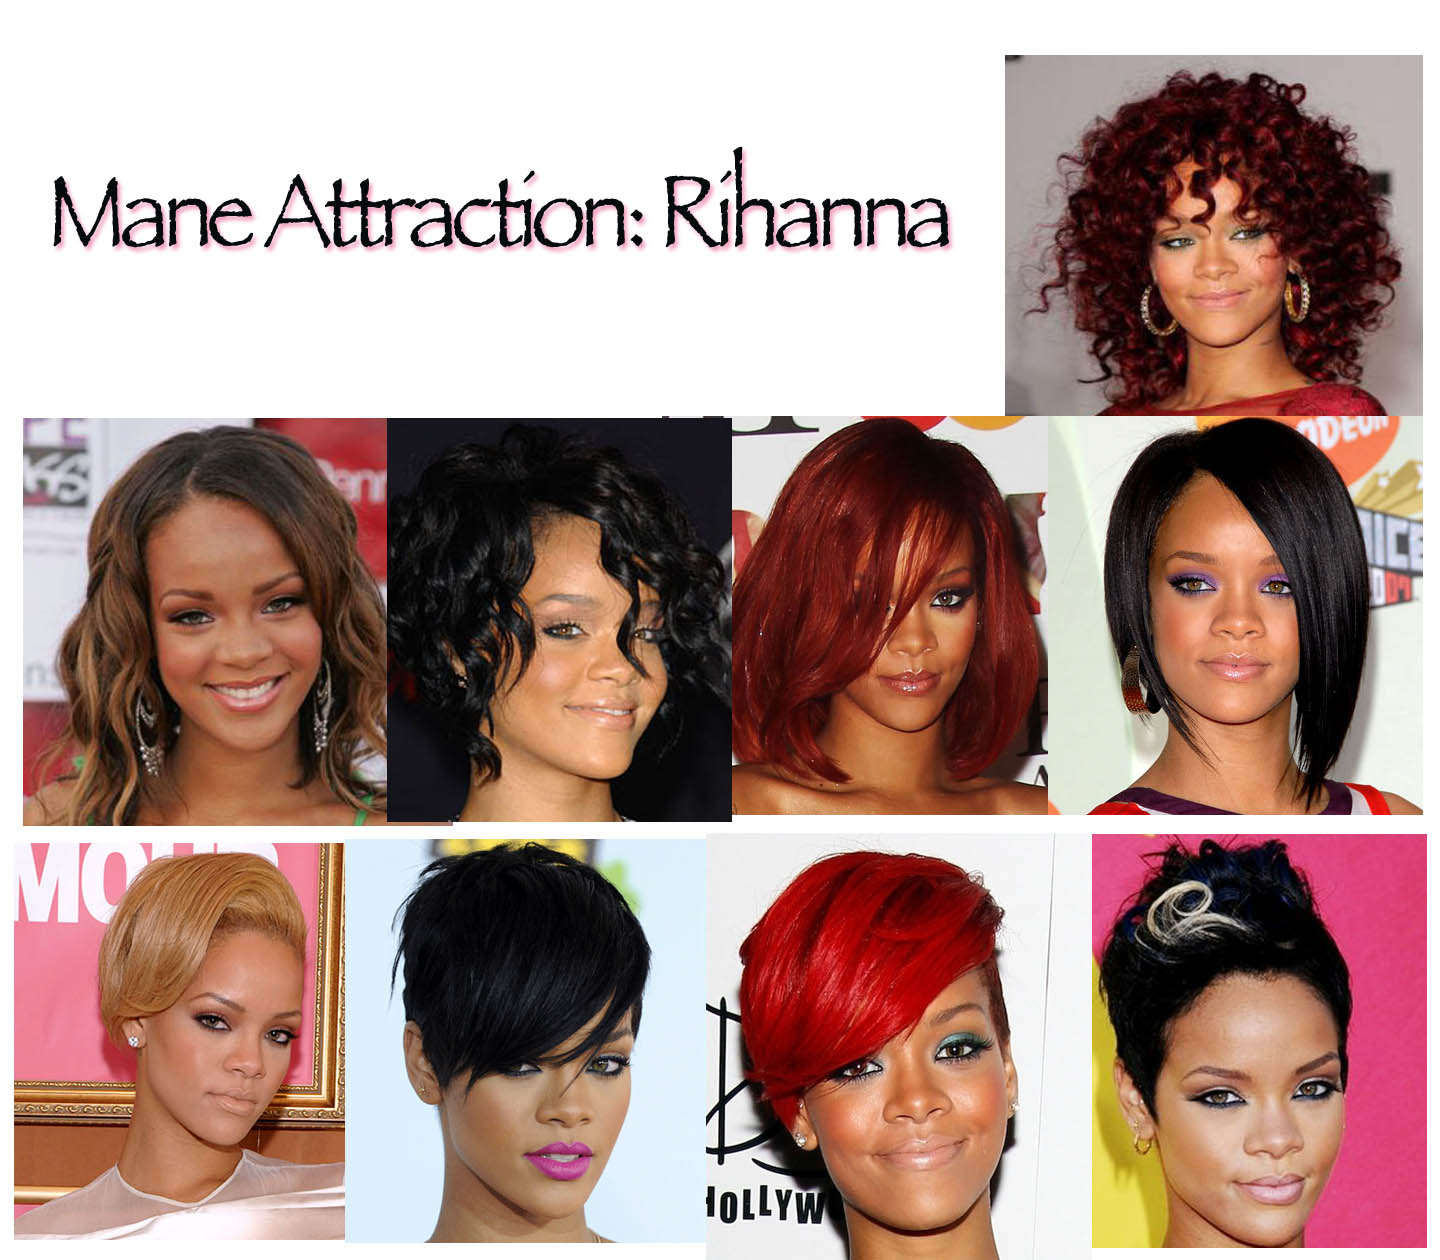 Hairstyles For Women Over 60 With Gray Hair rihanna s hairstyles hairstyles the latest celebrity hair style 